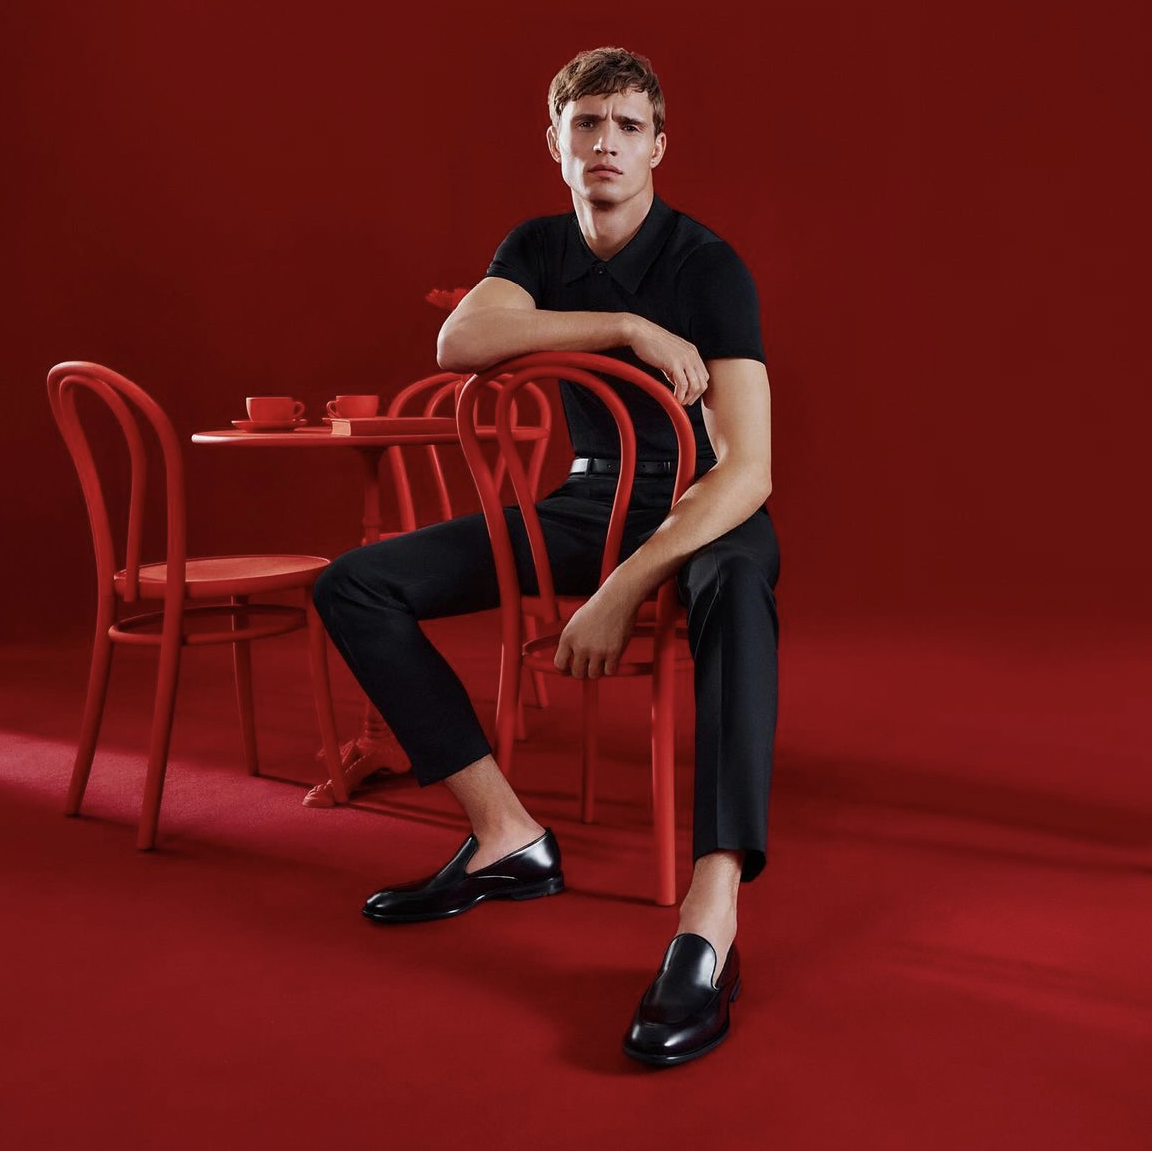 A striking image showcasing a Caucasian male model, against a stylish all-red backdrop, including a red table, red chair, and red room décor.